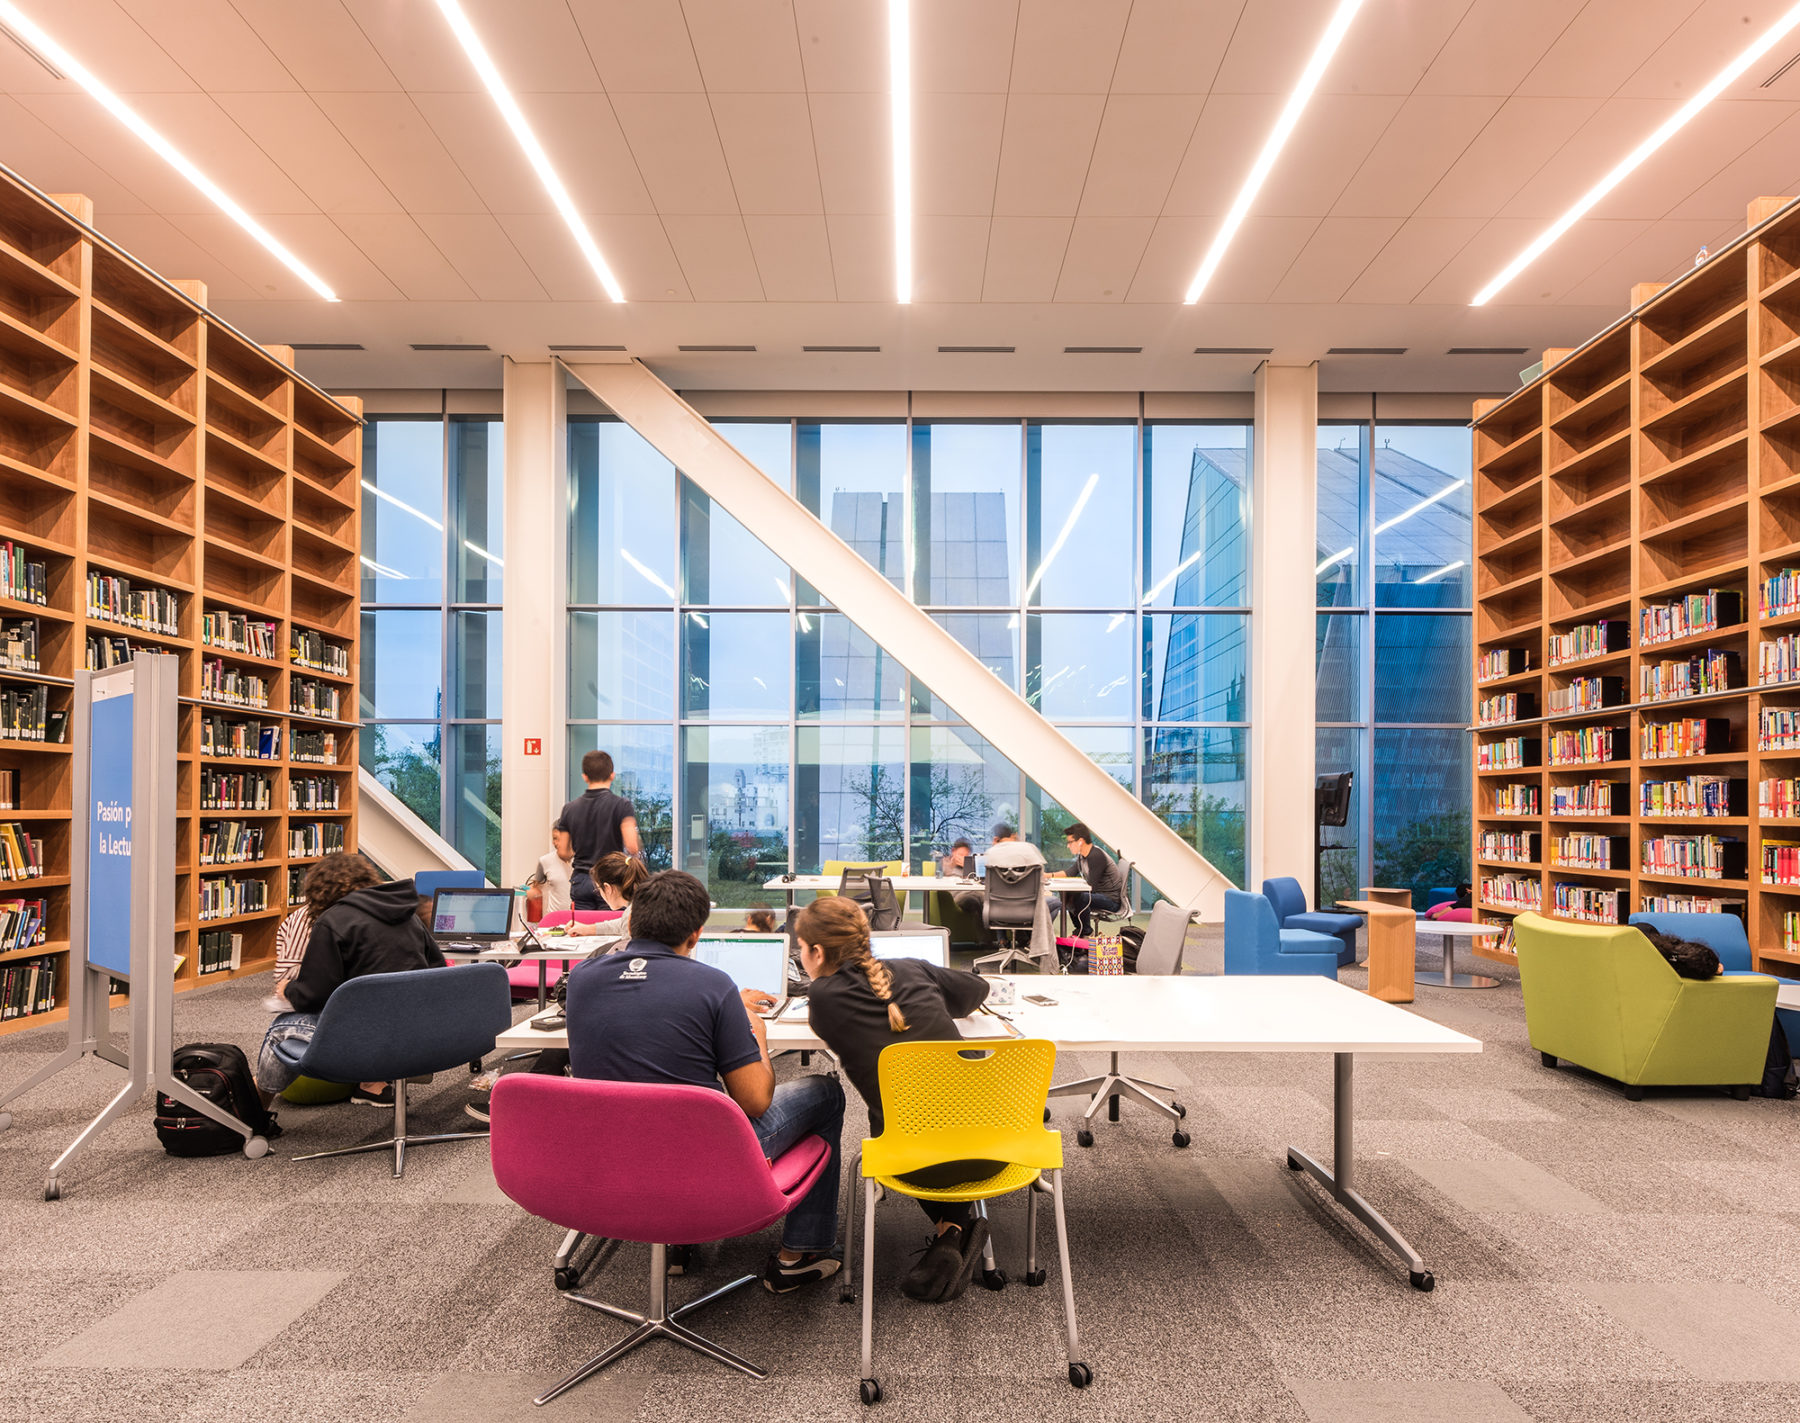 work spaces within book stacks